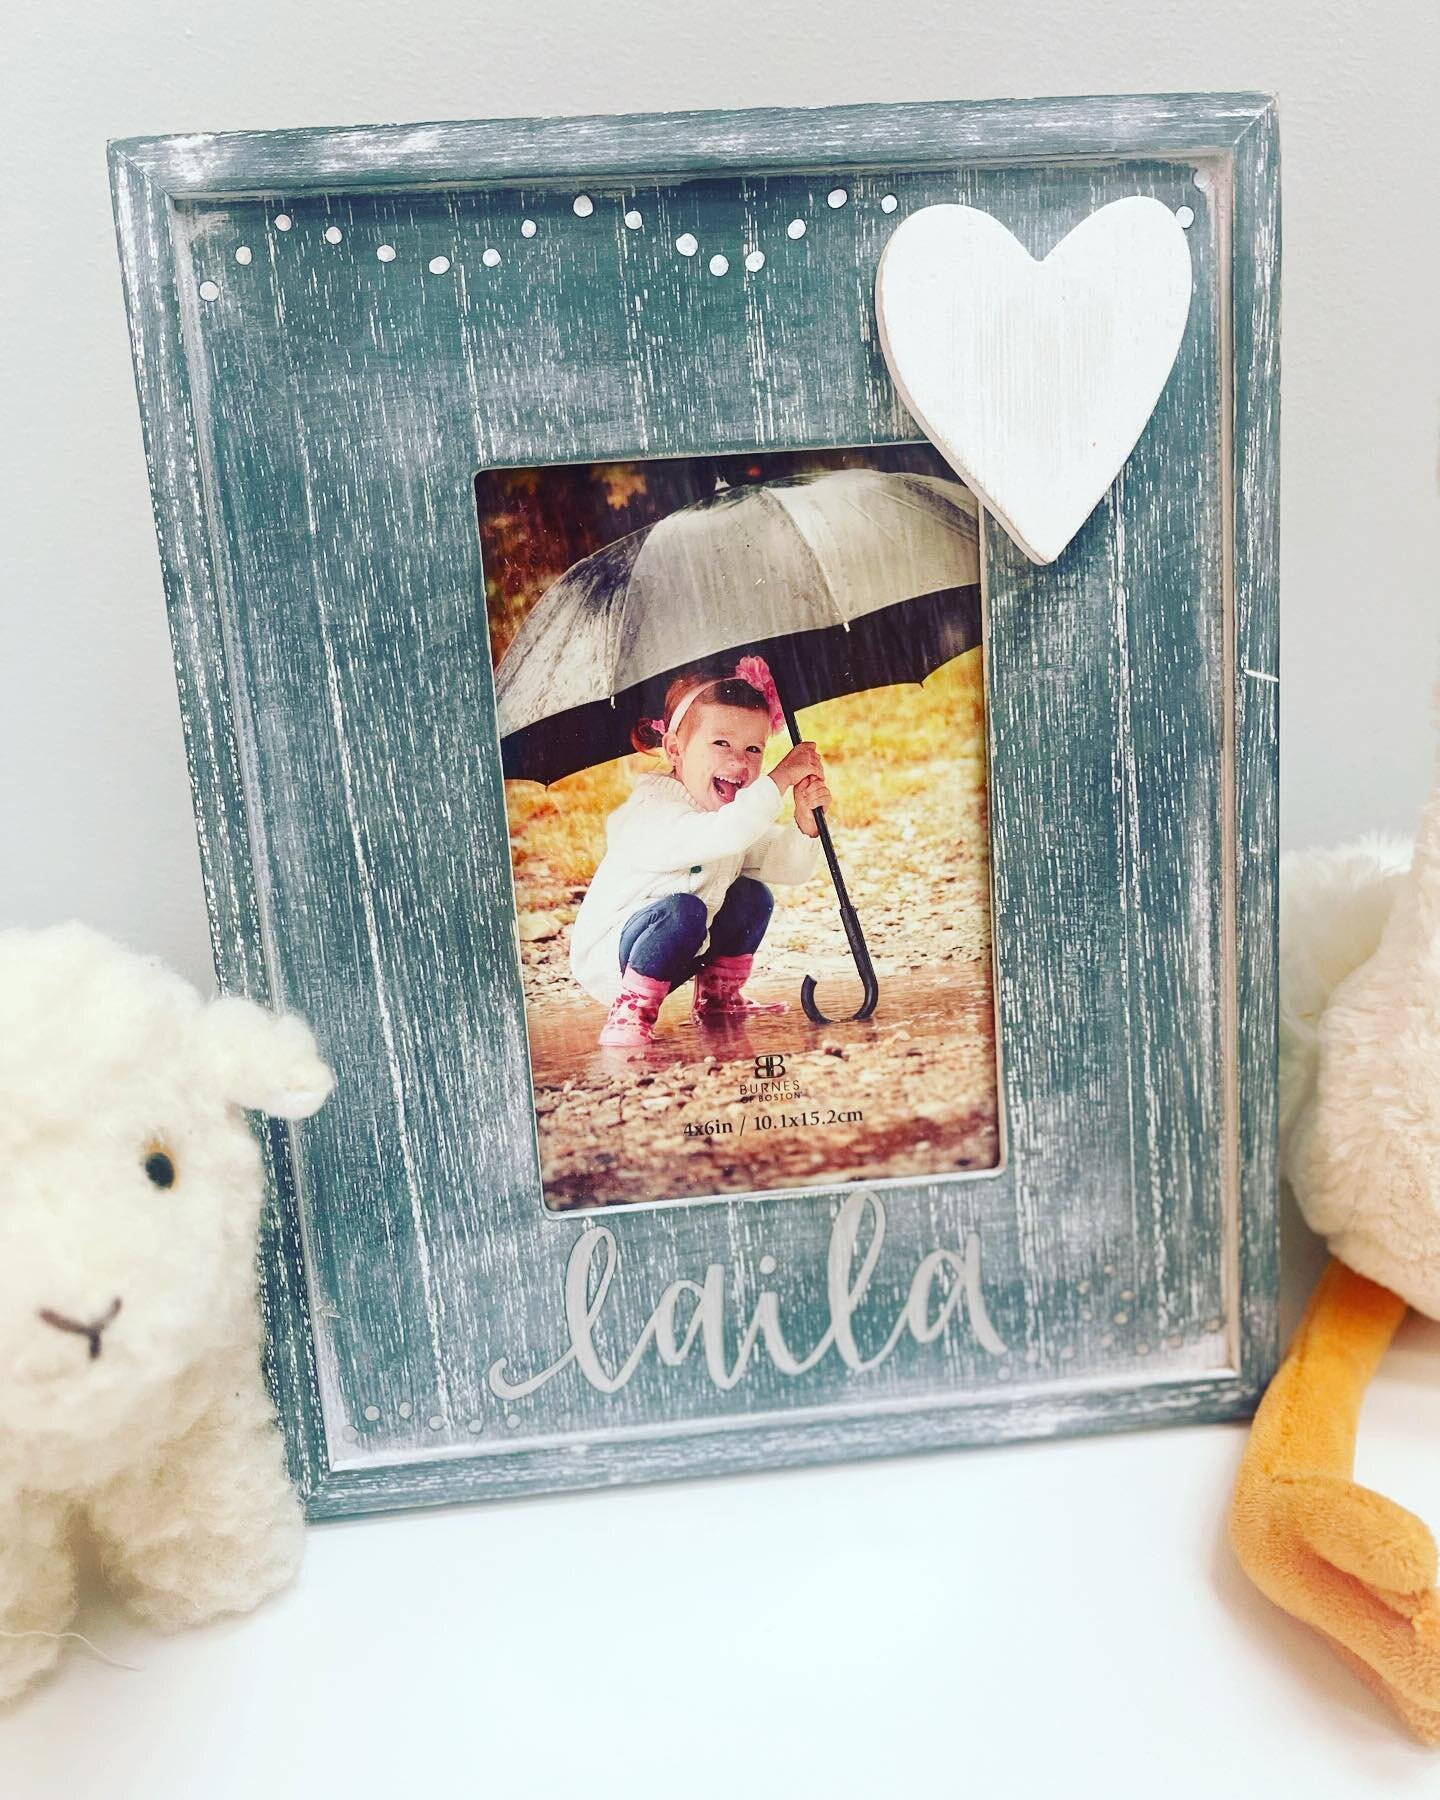 Personalized photo frame for a new babe 🤍 dm to customize 
#newbornphoto #newborngifts #babygift #babyshower #calligraphy #calligrapher #personalizedgifts